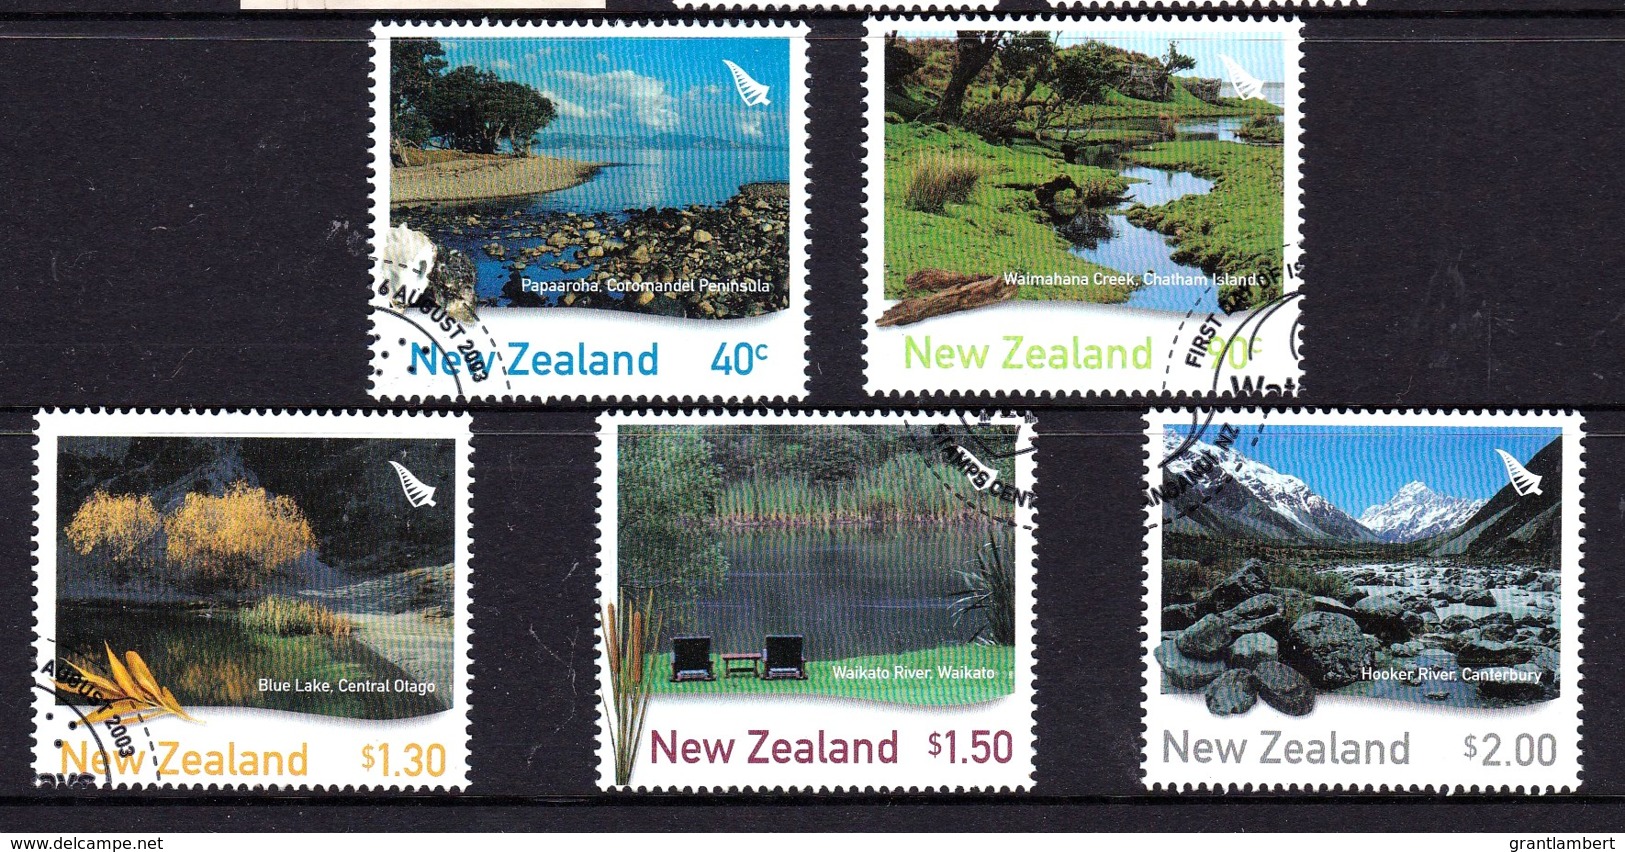 New Zealand 2002 Scenic Coastlines, 2003 Scenic Definitives & Waterways Sets Used - Used Stamps